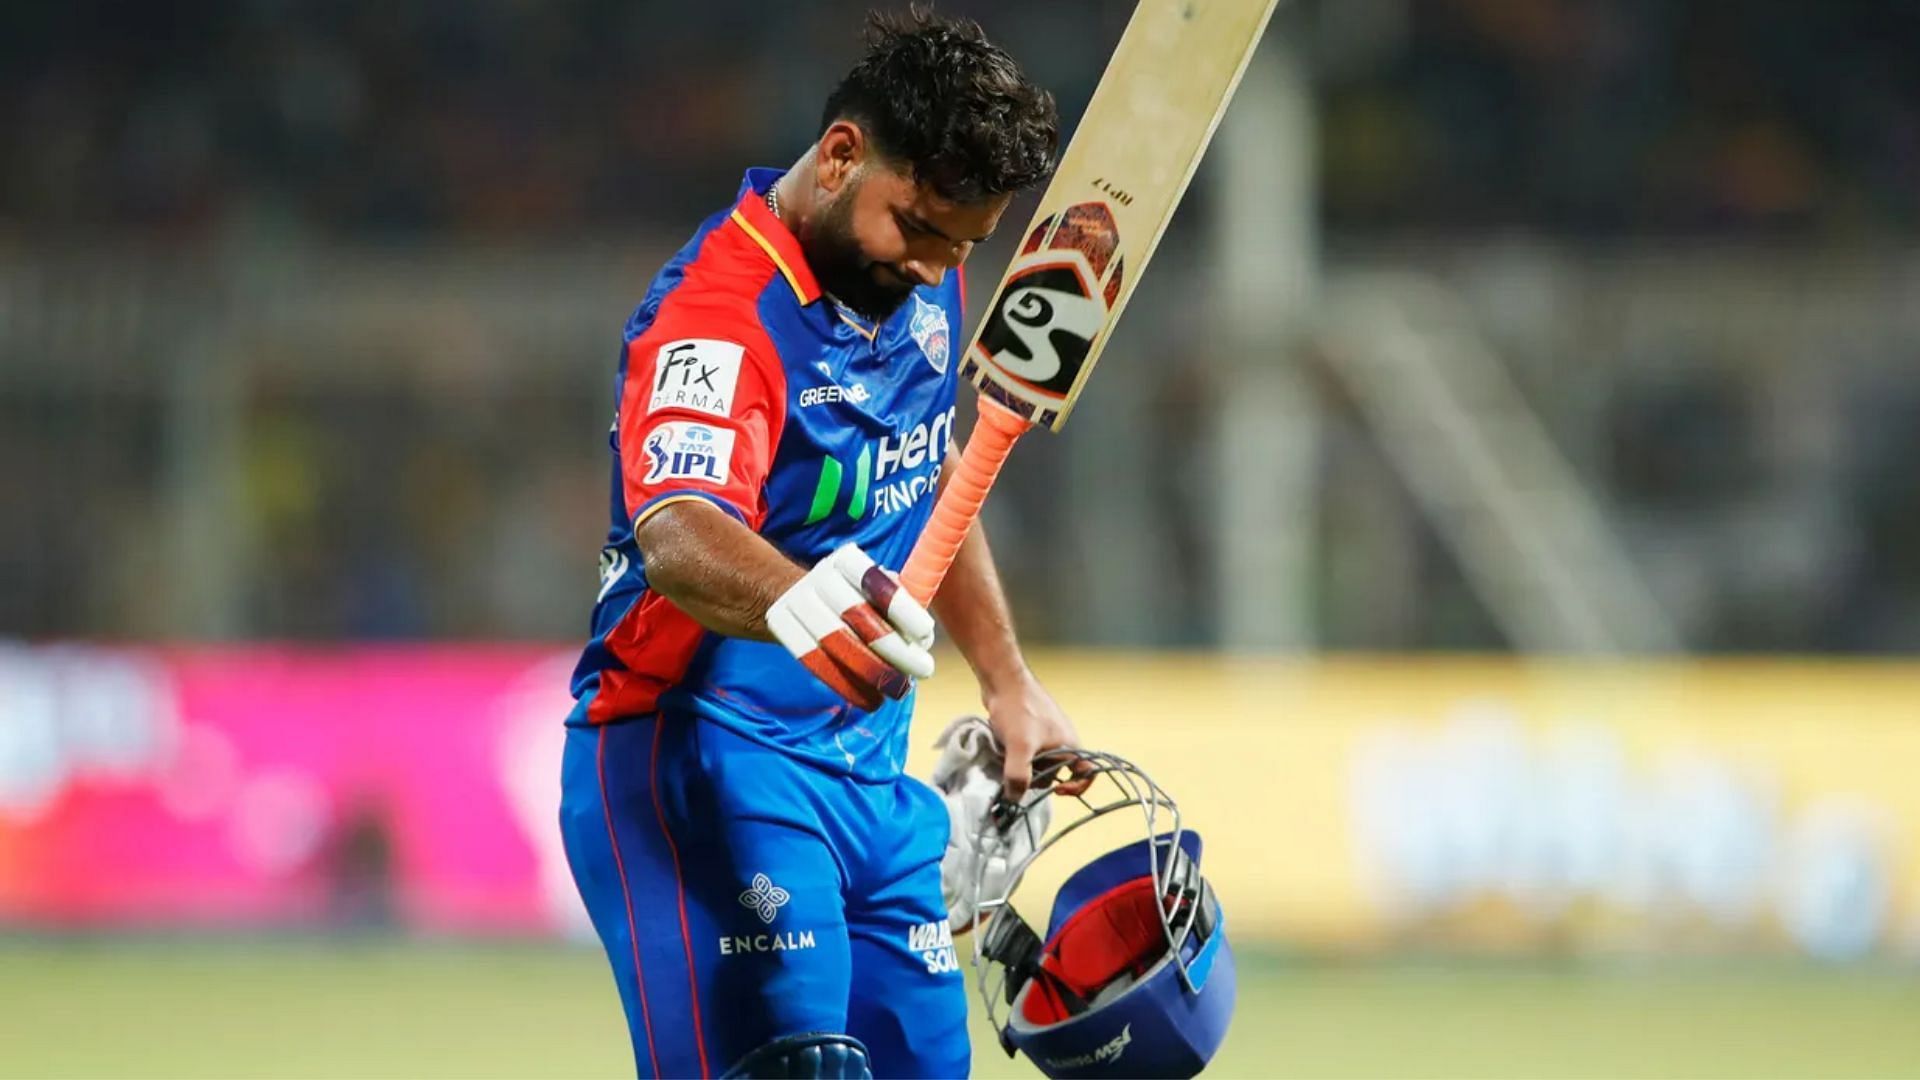 Rishabh Pant was livid with himself after the dismissal